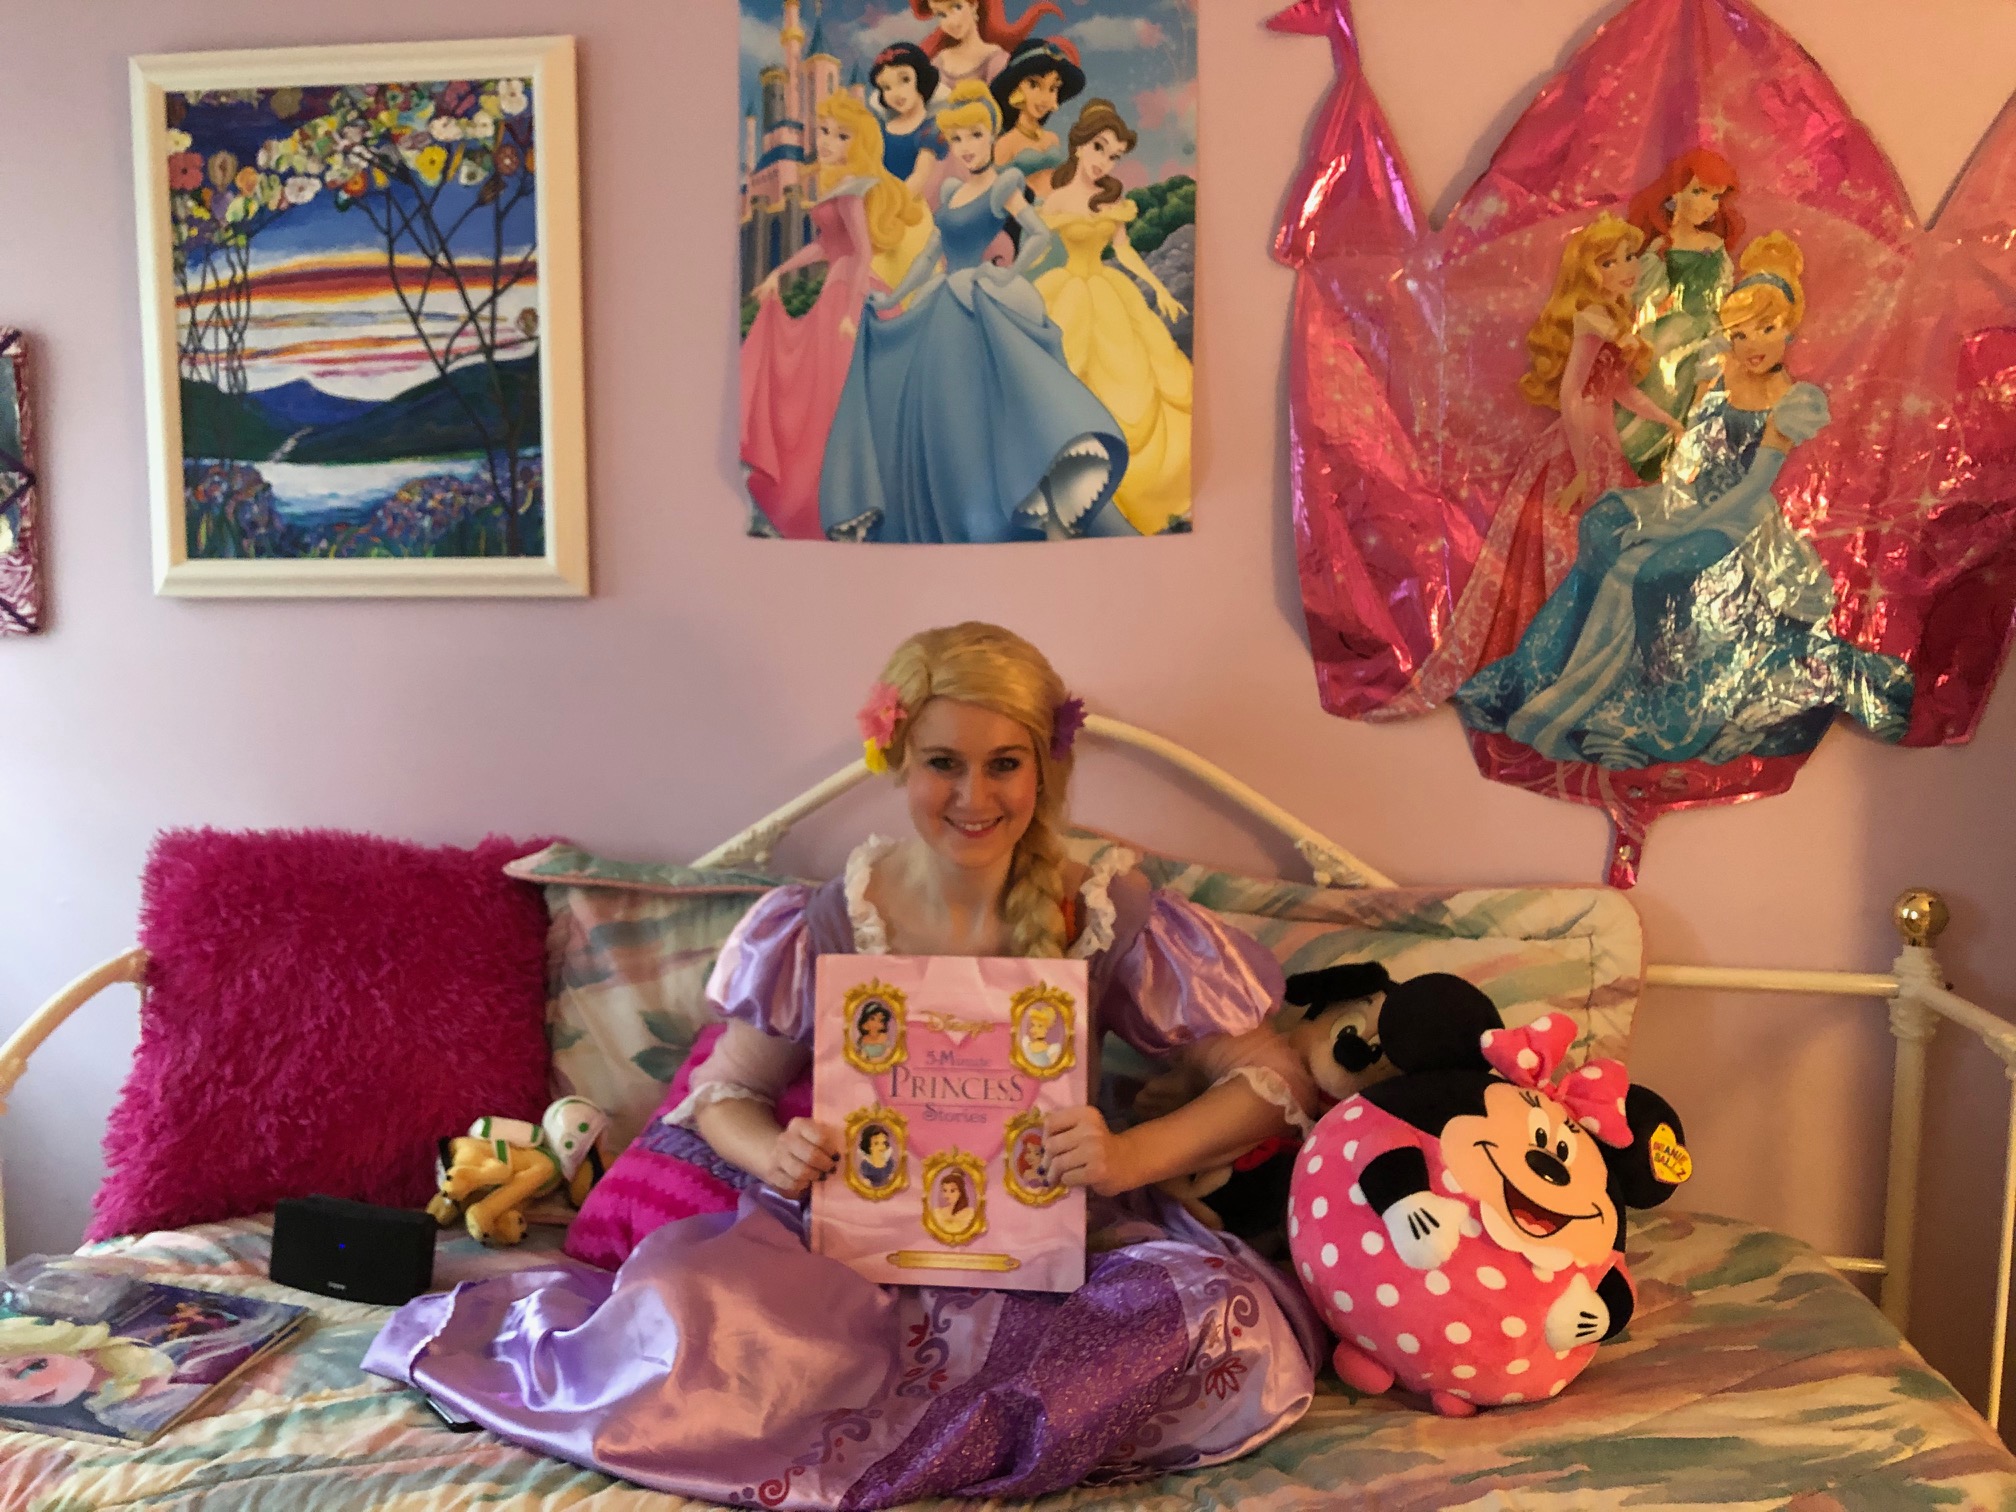 Virtual Princess Party Playdate in the comfort of your own home. Your choice of Princess performer; professional actress, singer, dancer , and children's entertainer.